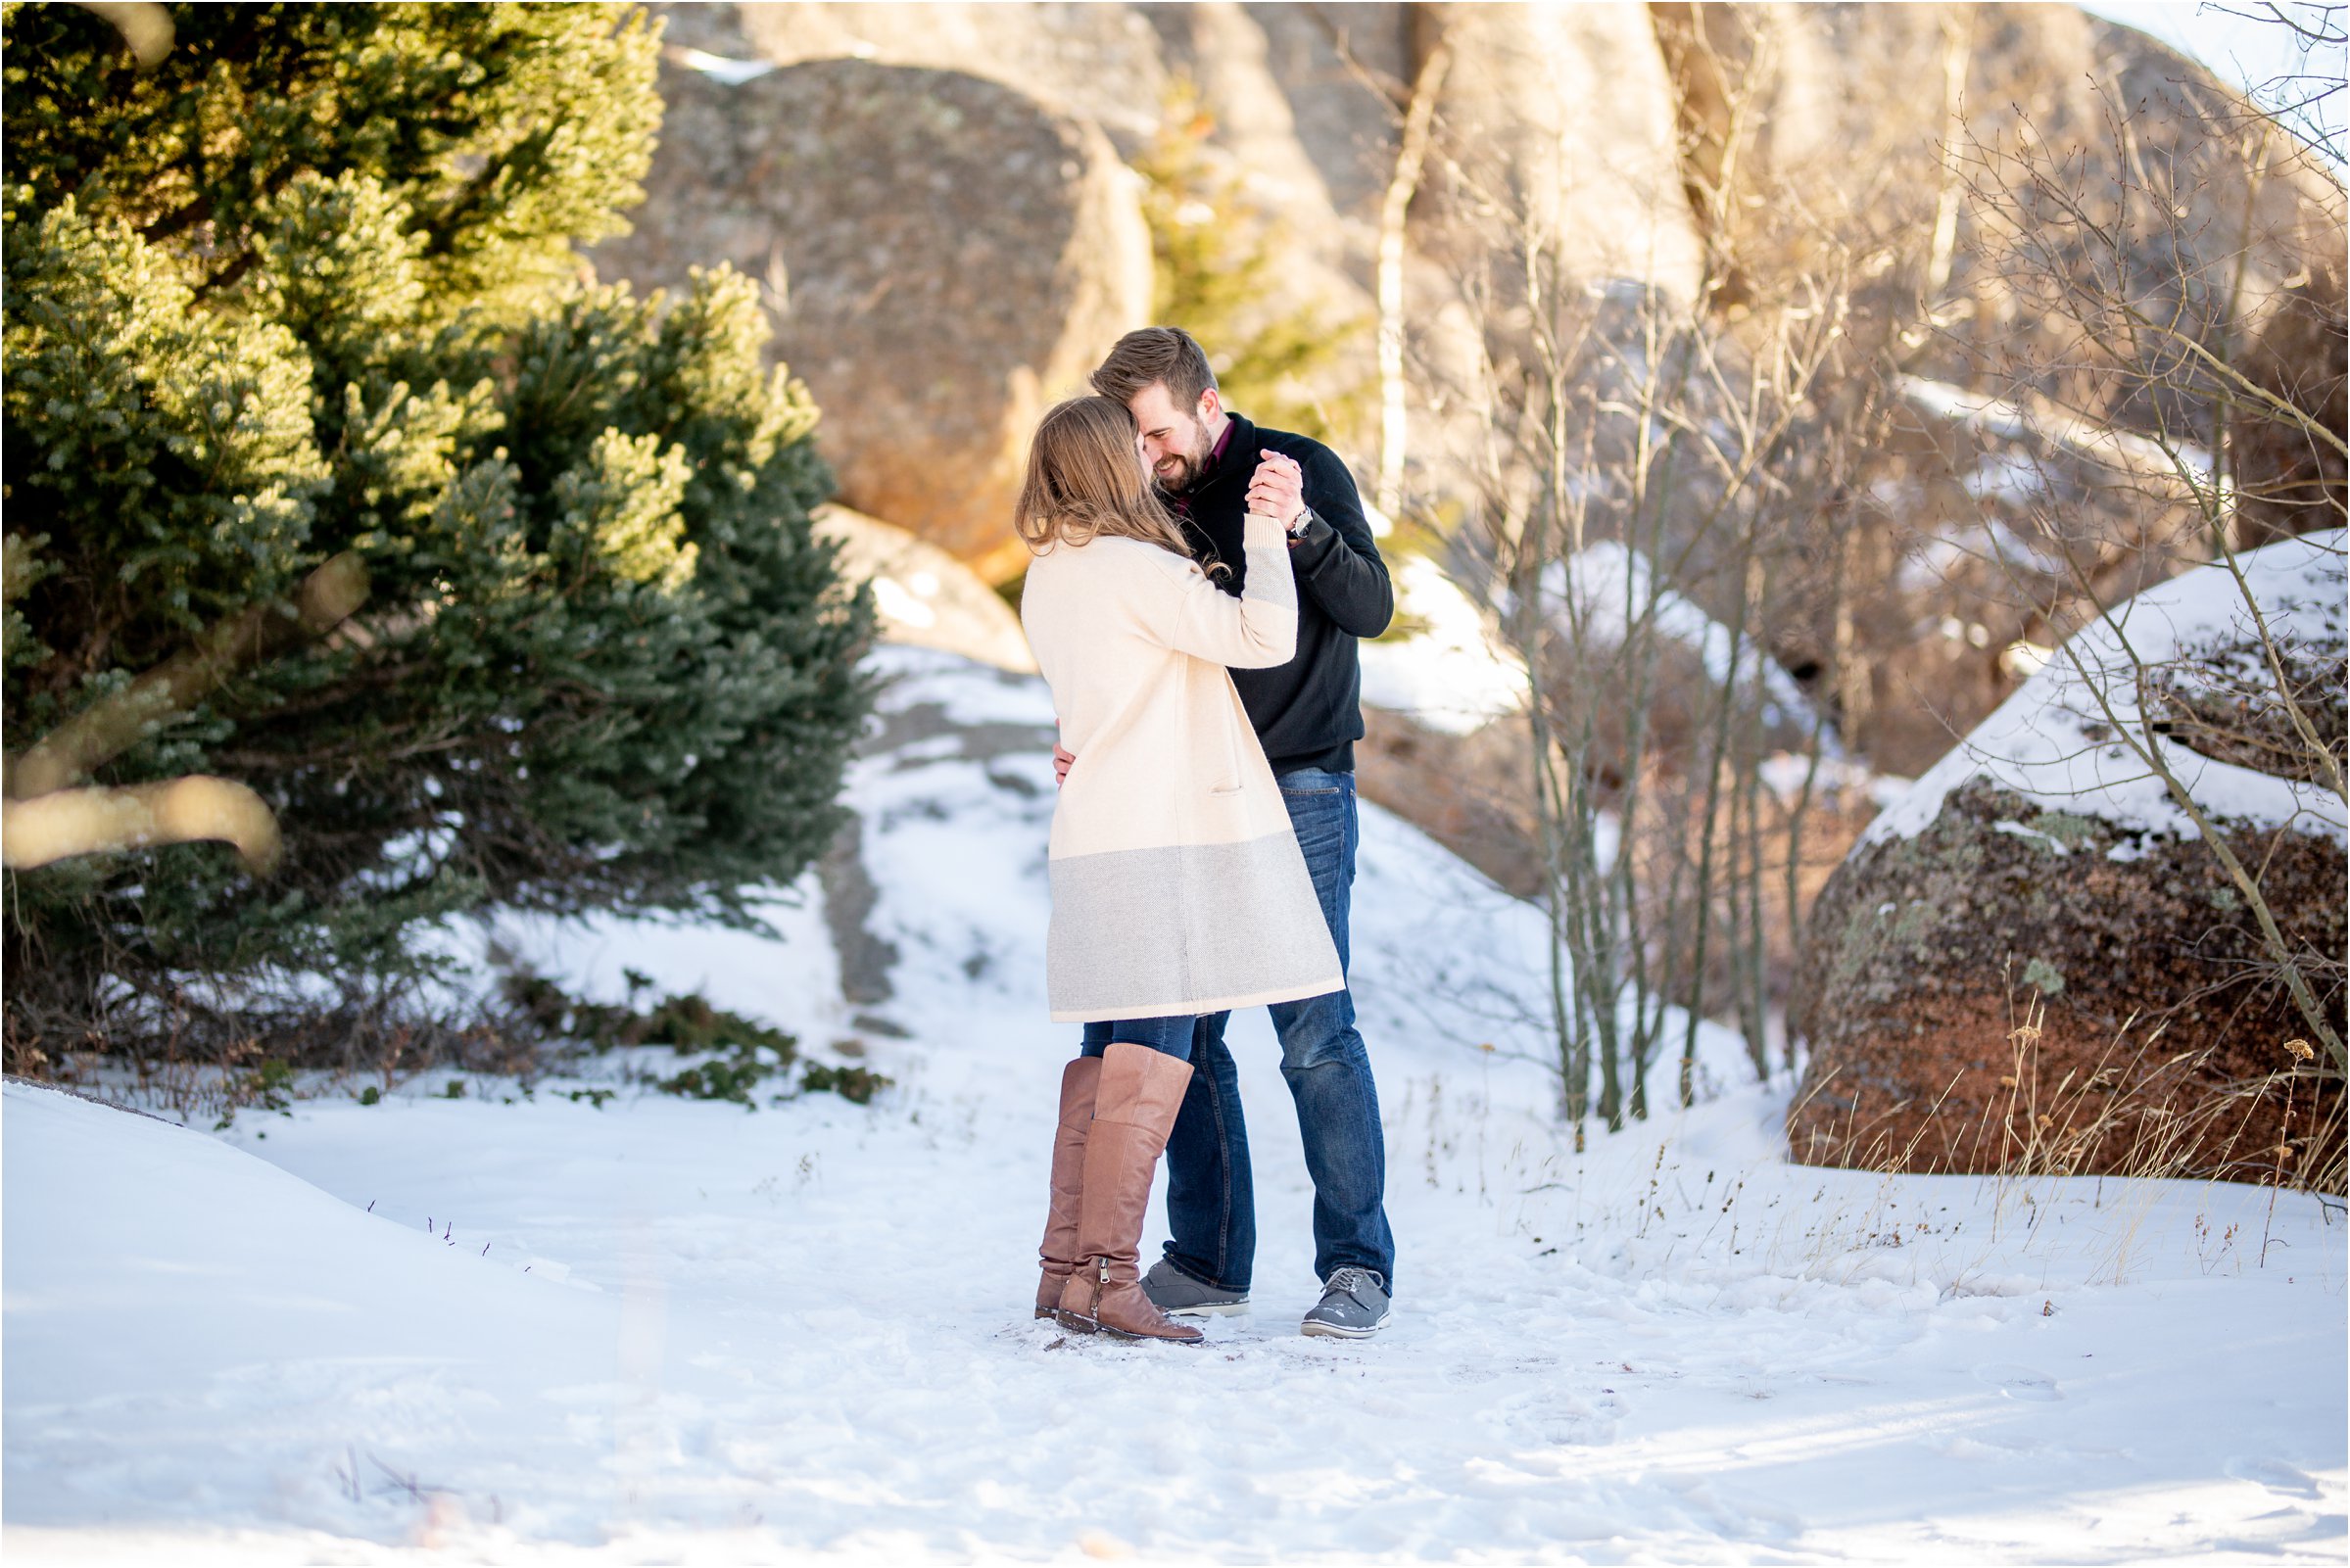 Engaged couple dancing in the snow together with Vedauwoo in the background